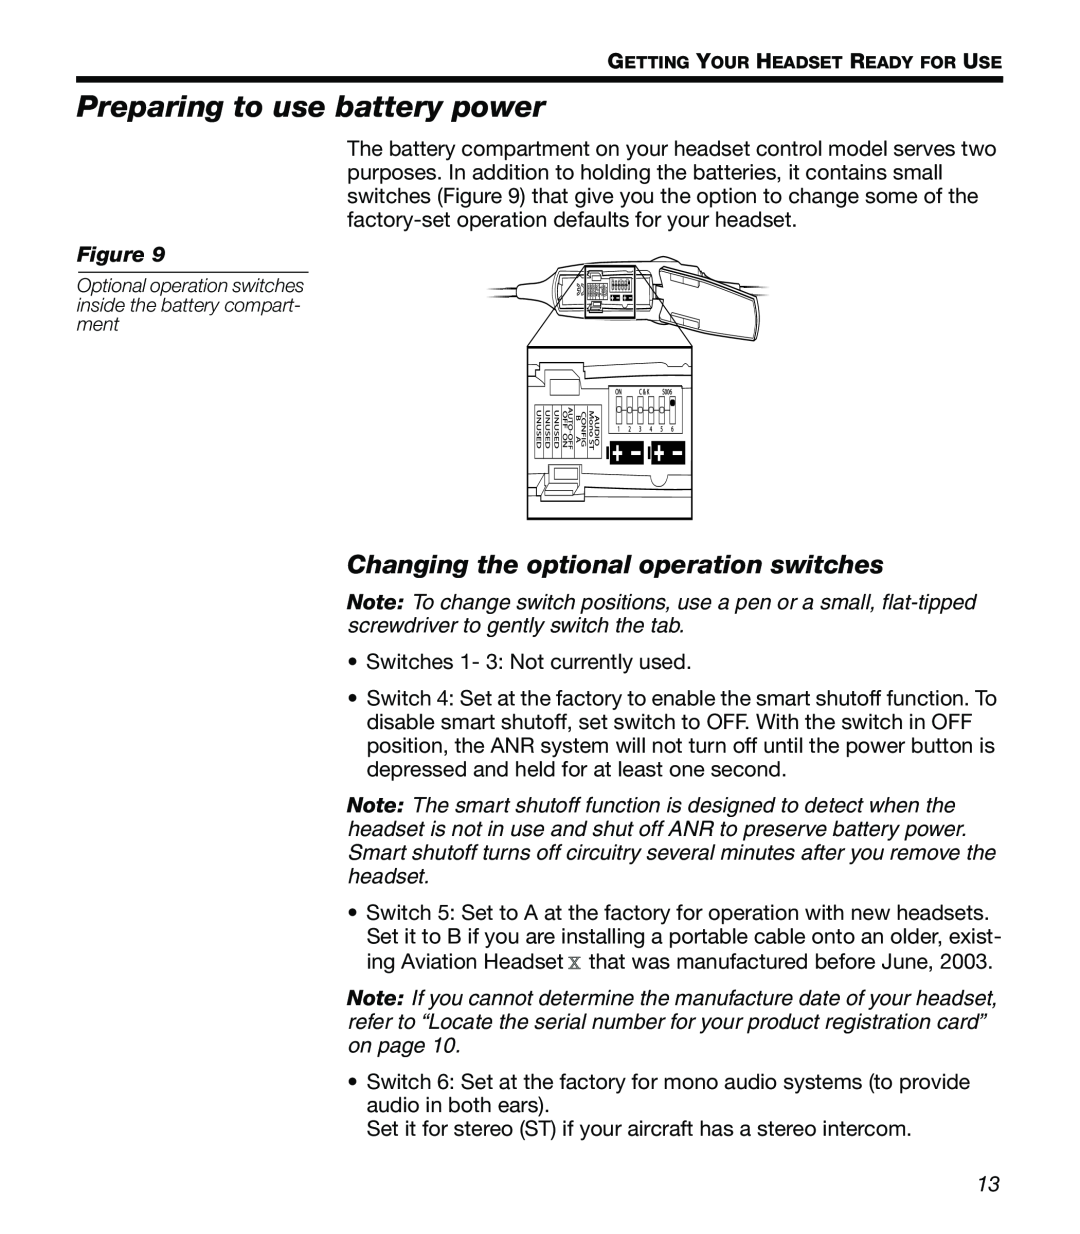 Bose X manual Preparing to use battery power, Changing the optional operation switches 